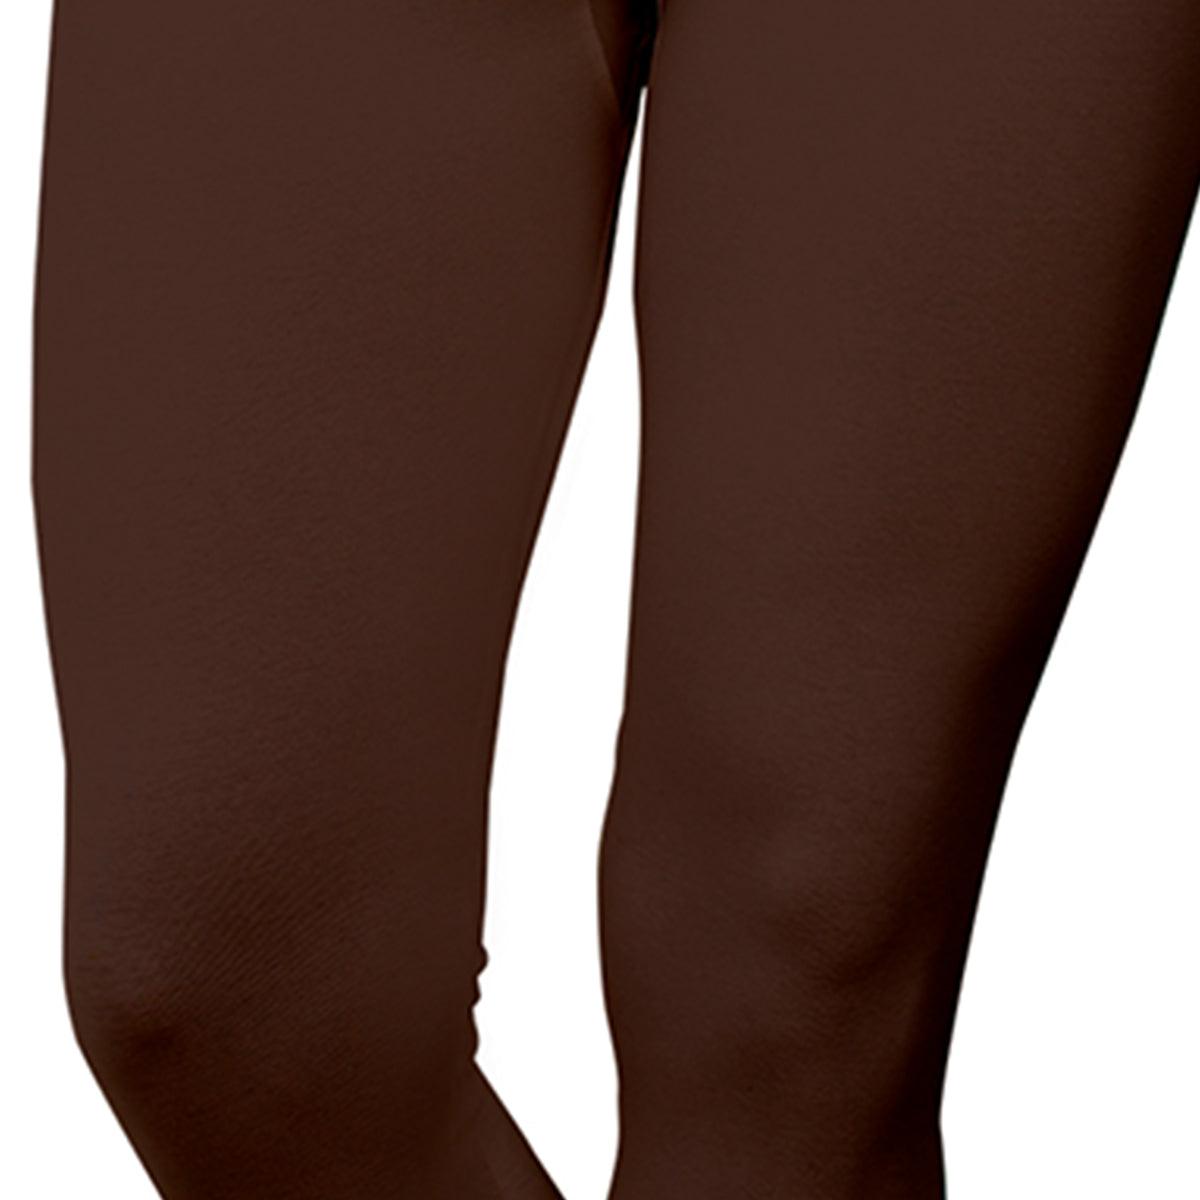 Buy SHOWOFF Women's Solid Ankle Length Coffee Brown Legging-AC-Plain-001_CoffeeBrown_M  at Amazon.in